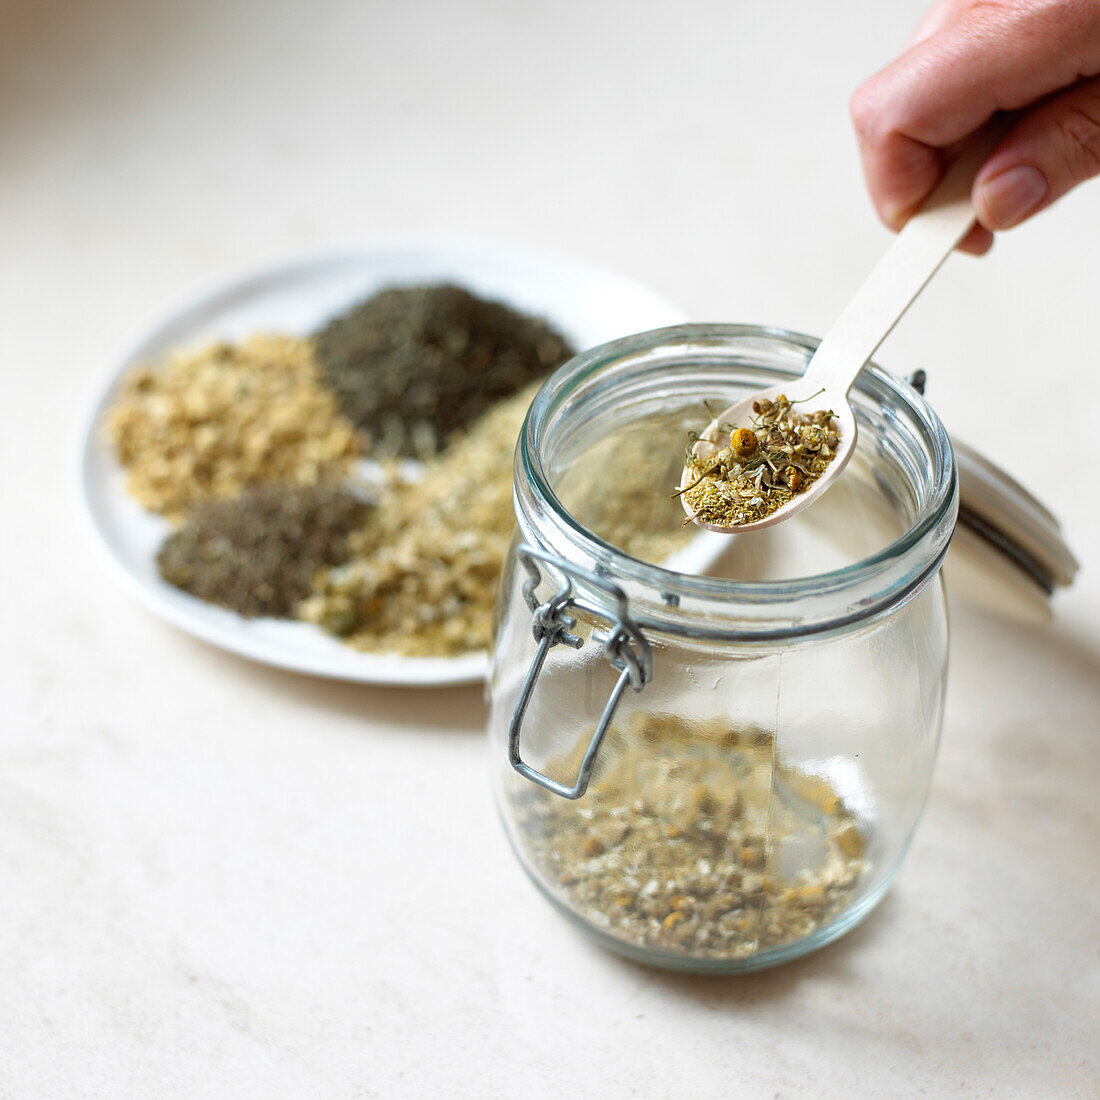 Spoon containing dry ground pepper, mint and thyme